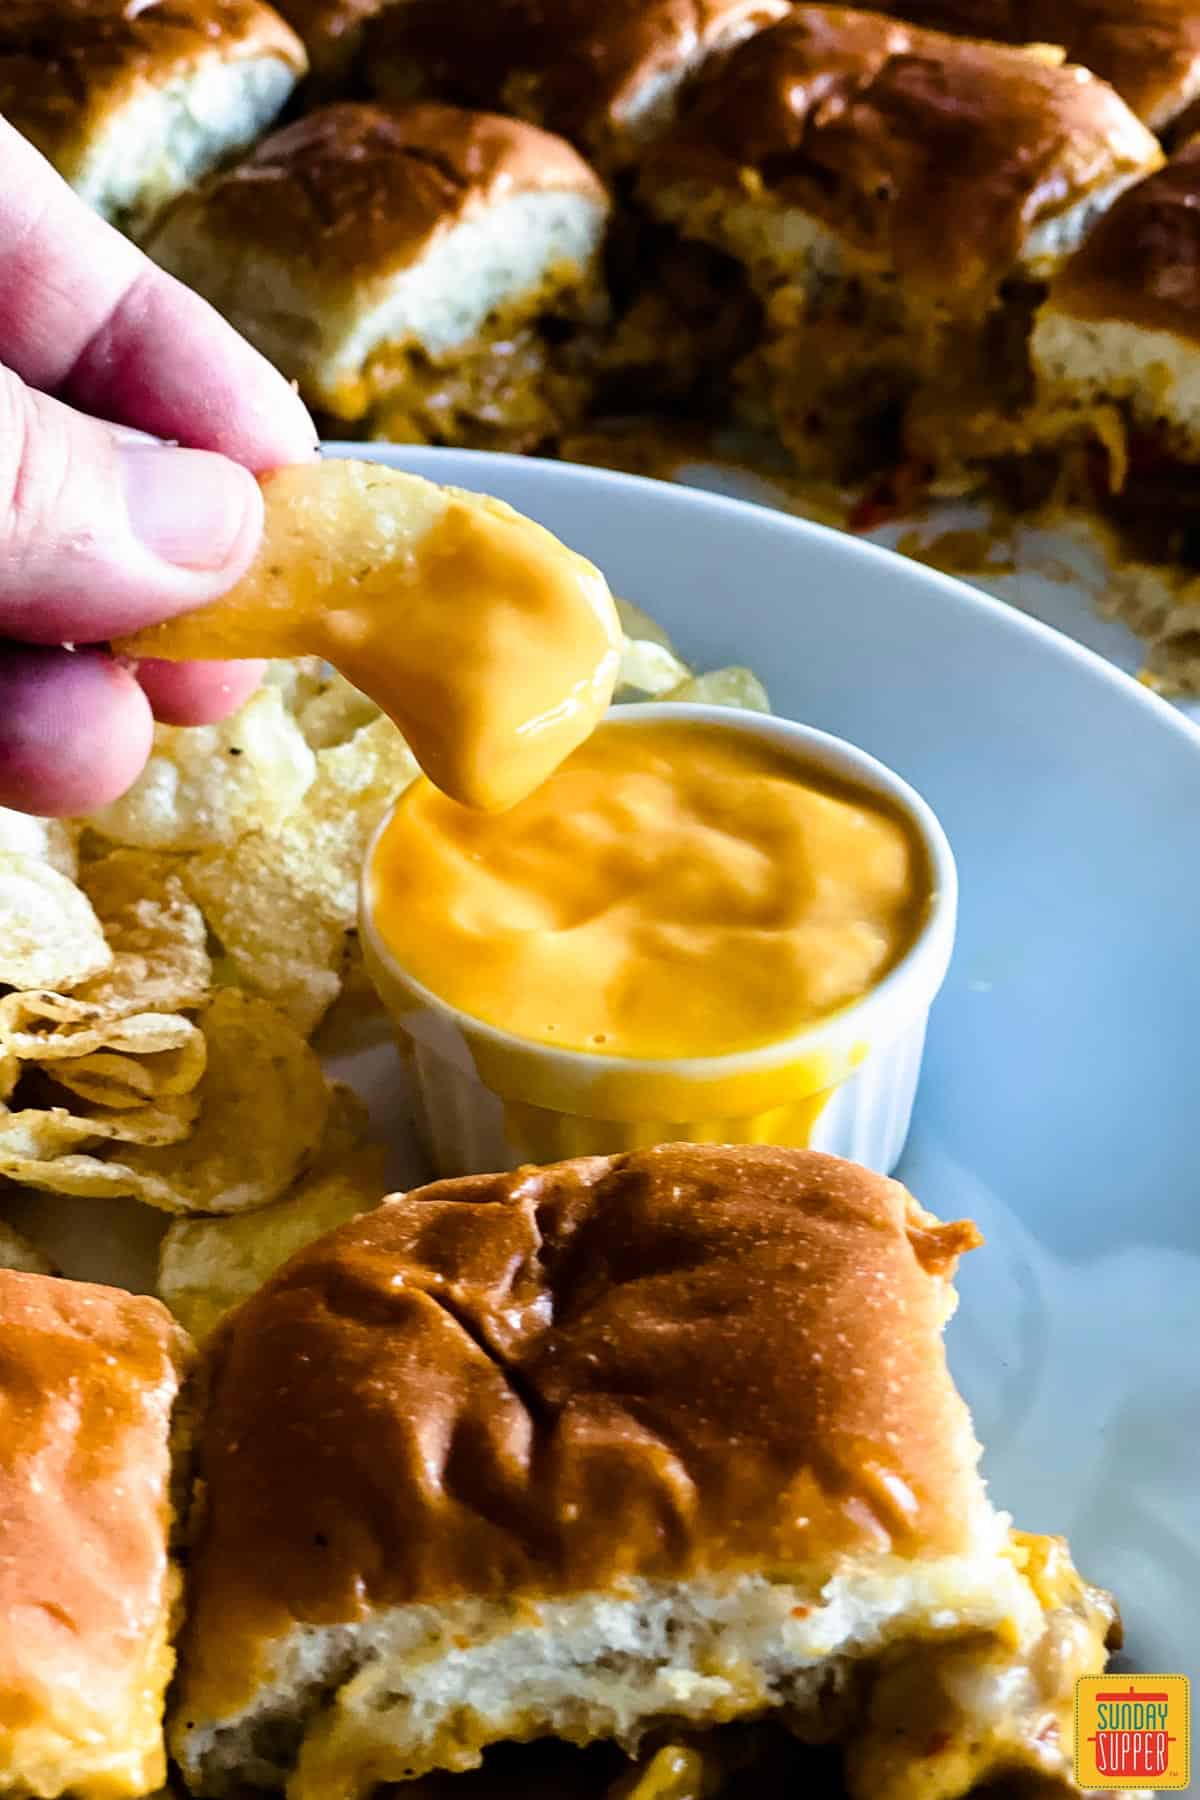 Dipping a chip into Ragu double cheddar cheese sauce on a white plate with sliders